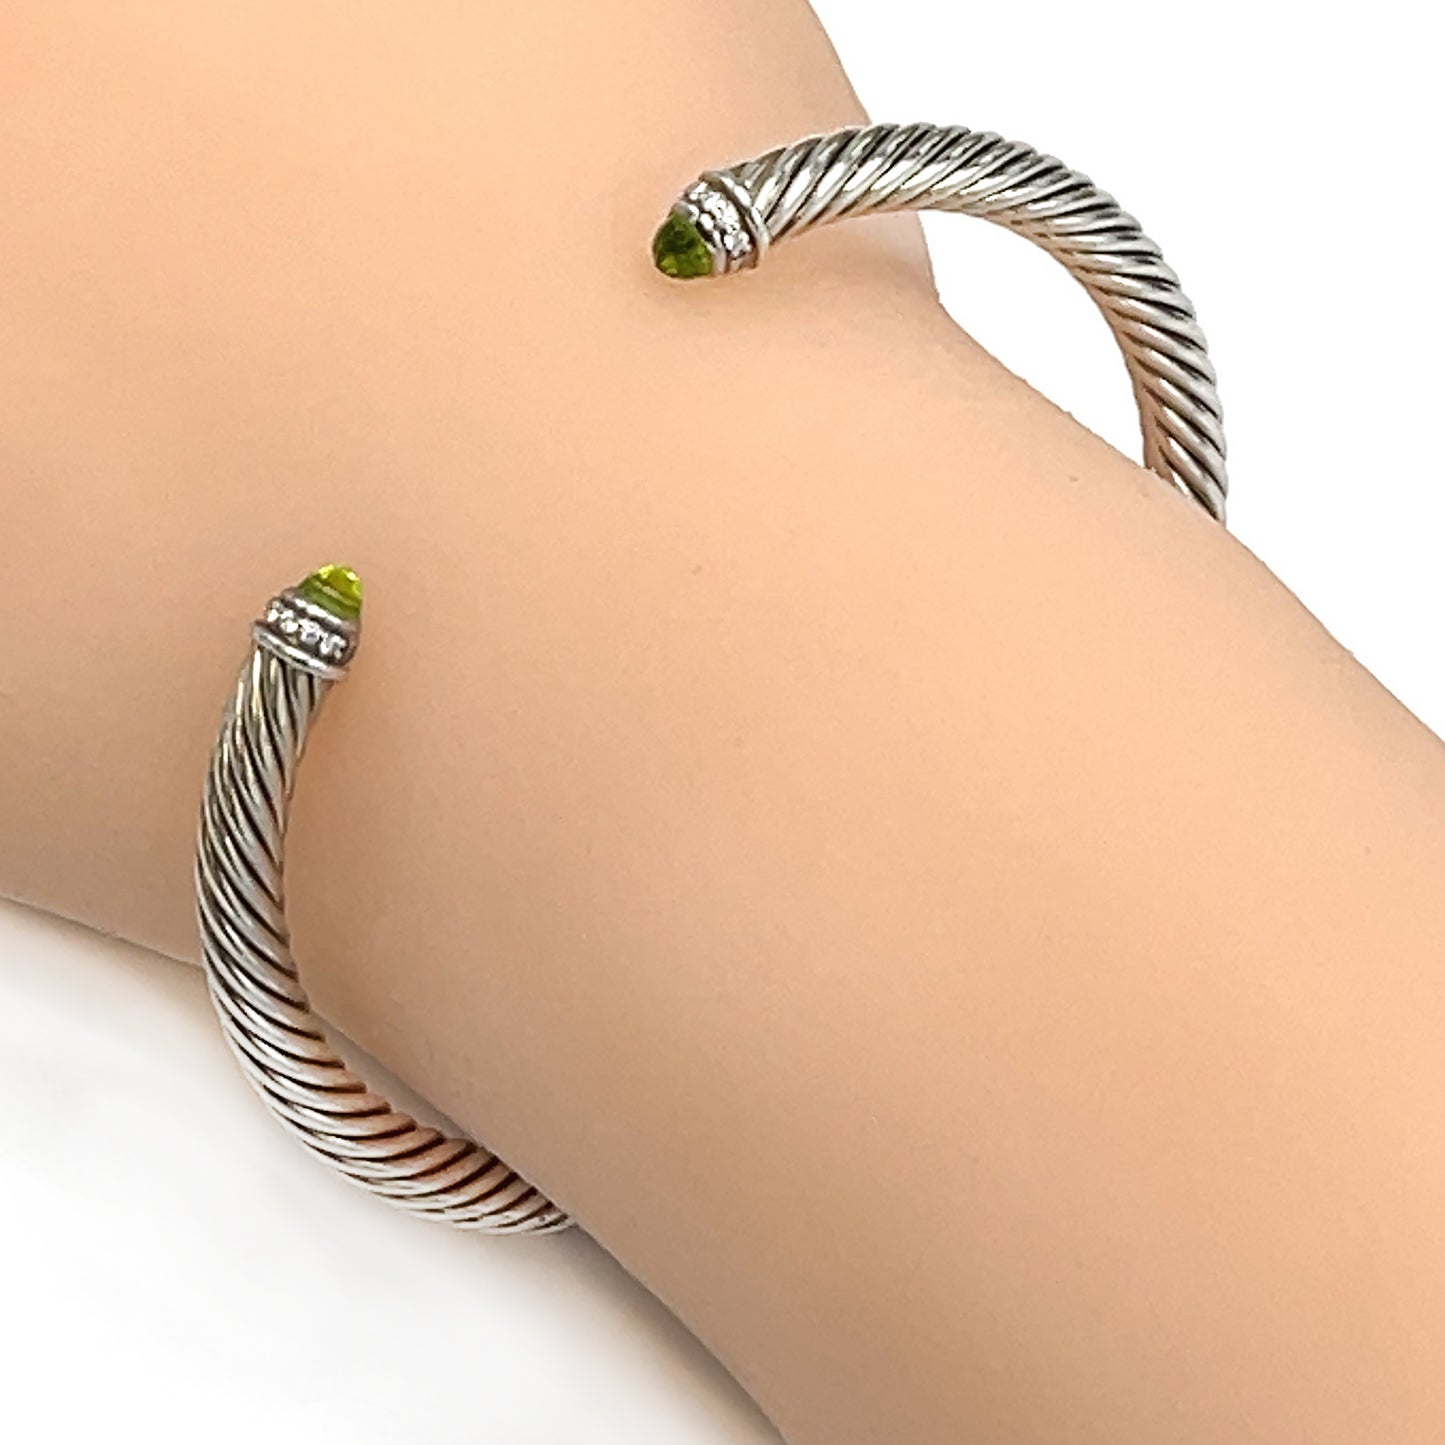 Load image into Gallery viewer, David Yurman Cable Classics Bracelet with Peridot
